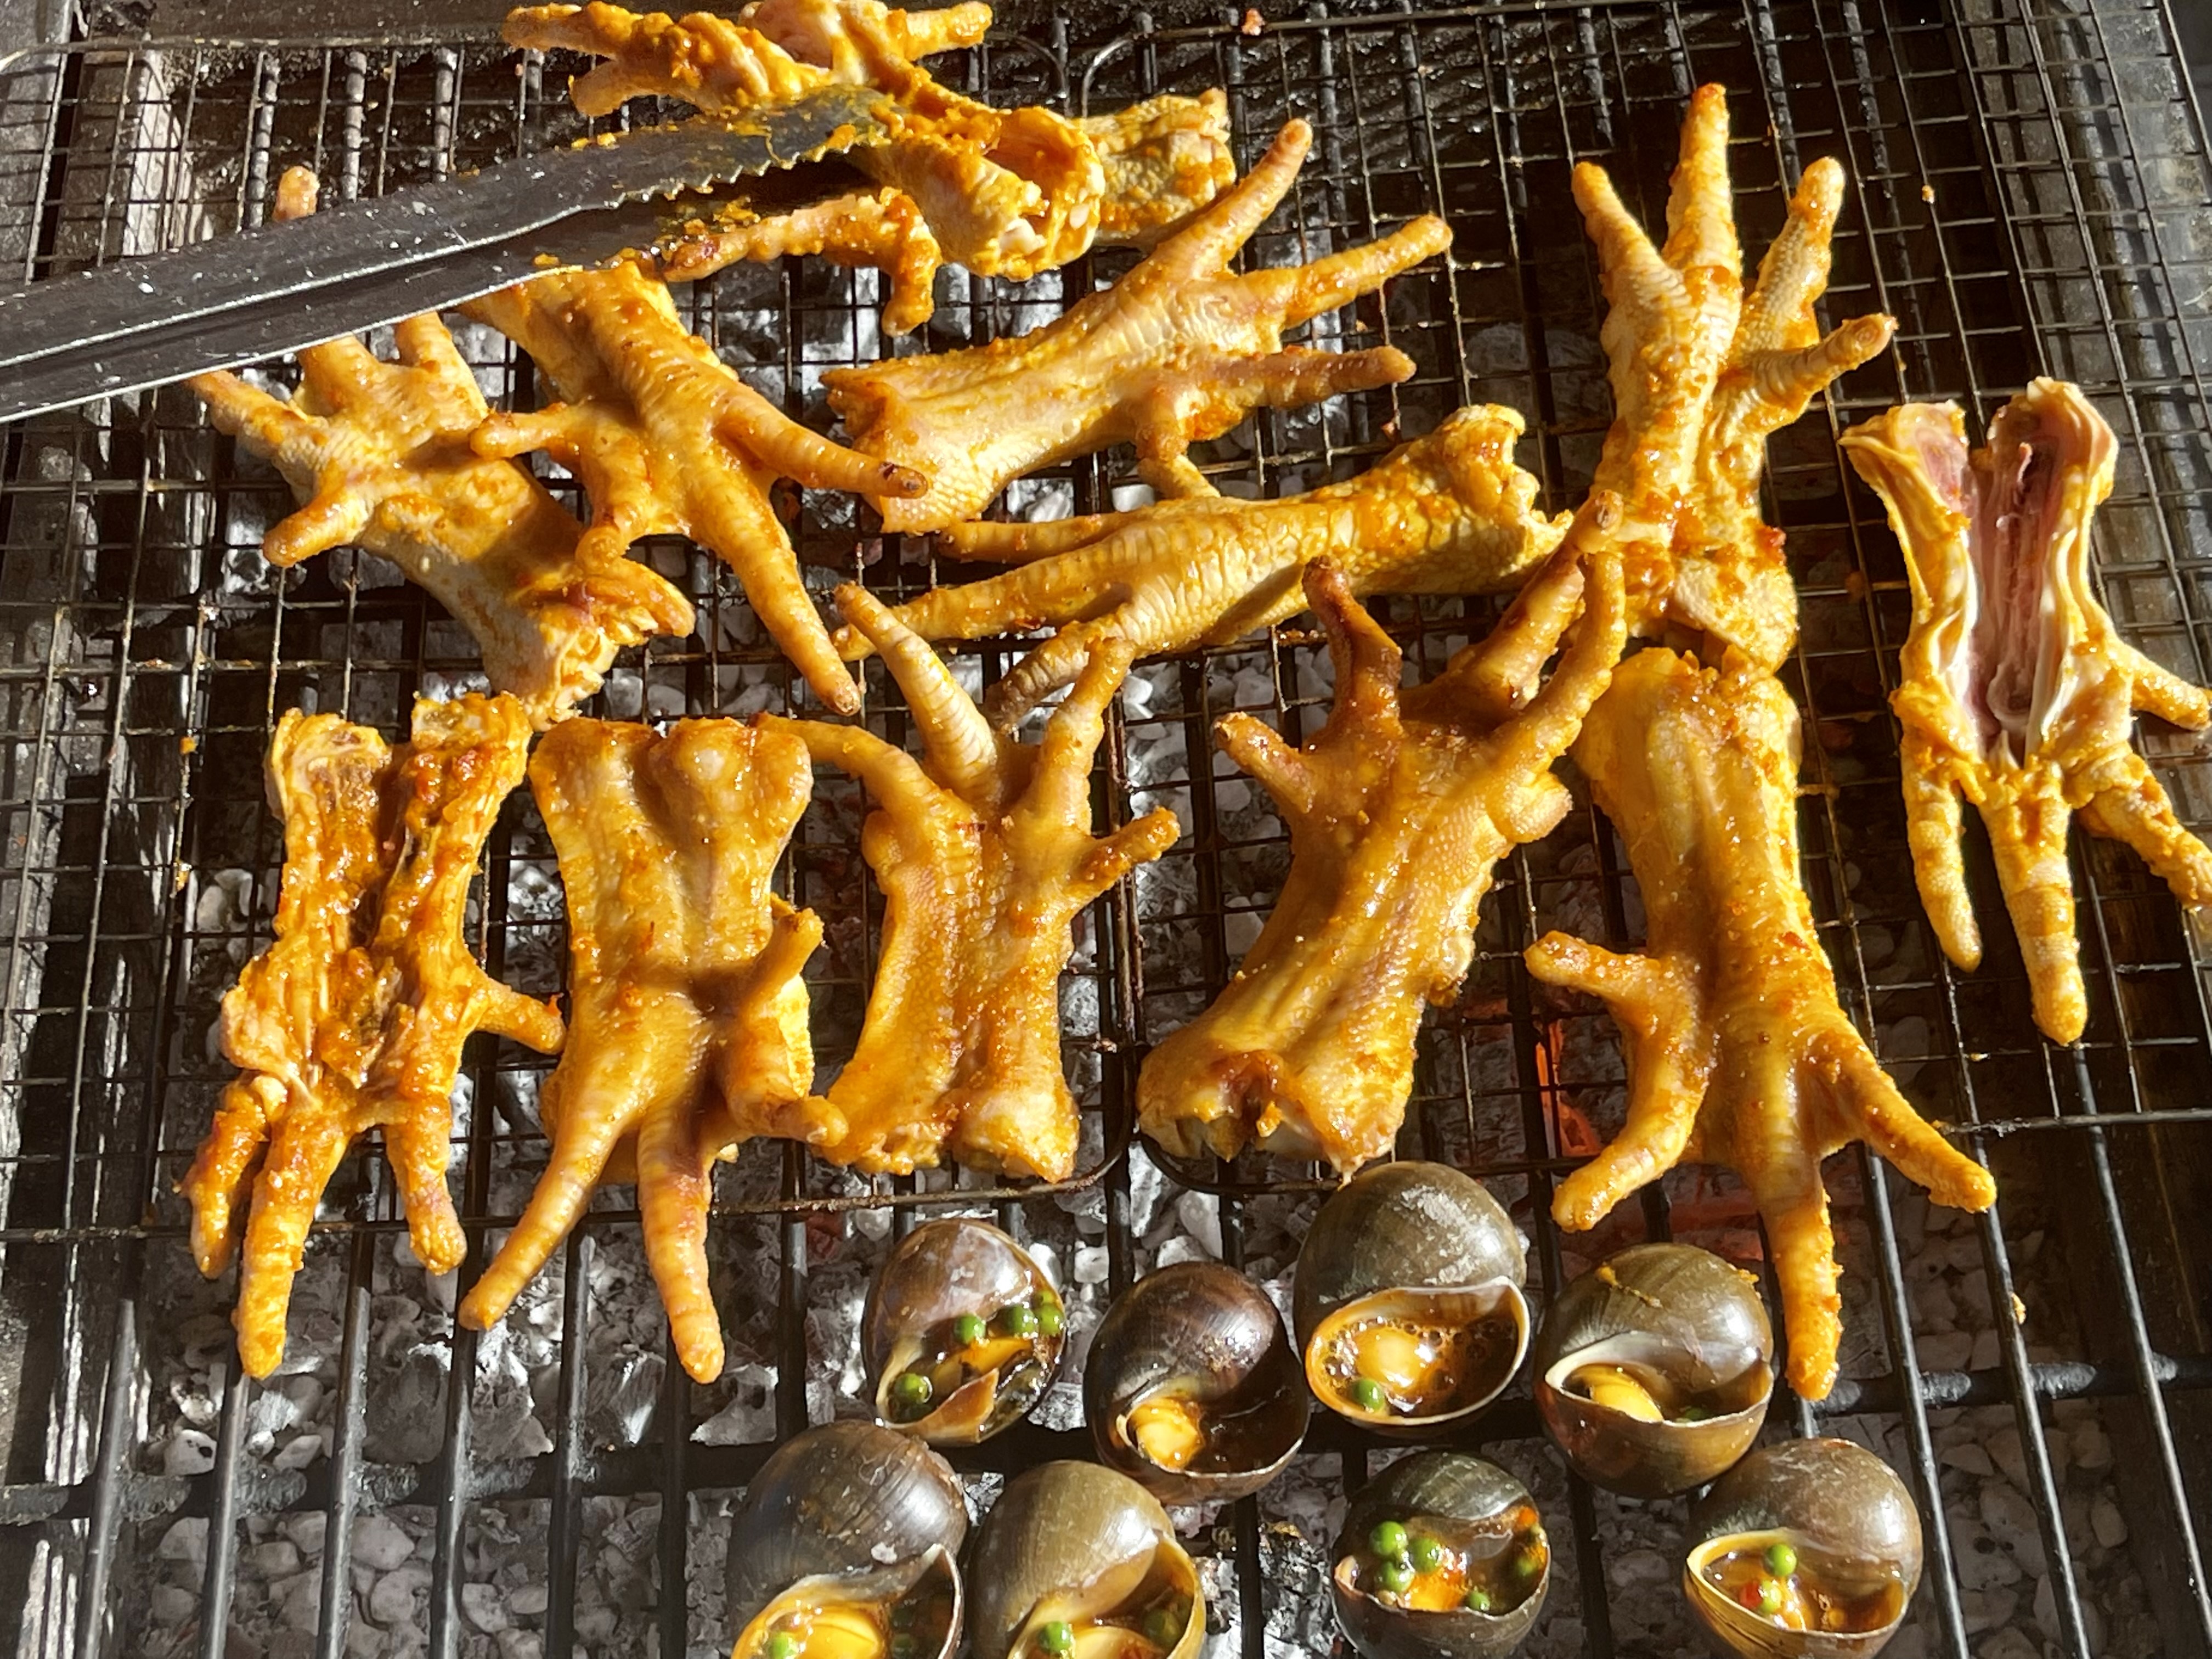 Grilled, boiled and fried: The great chicken feet trilogy you must explore in Ho Chi Minh City